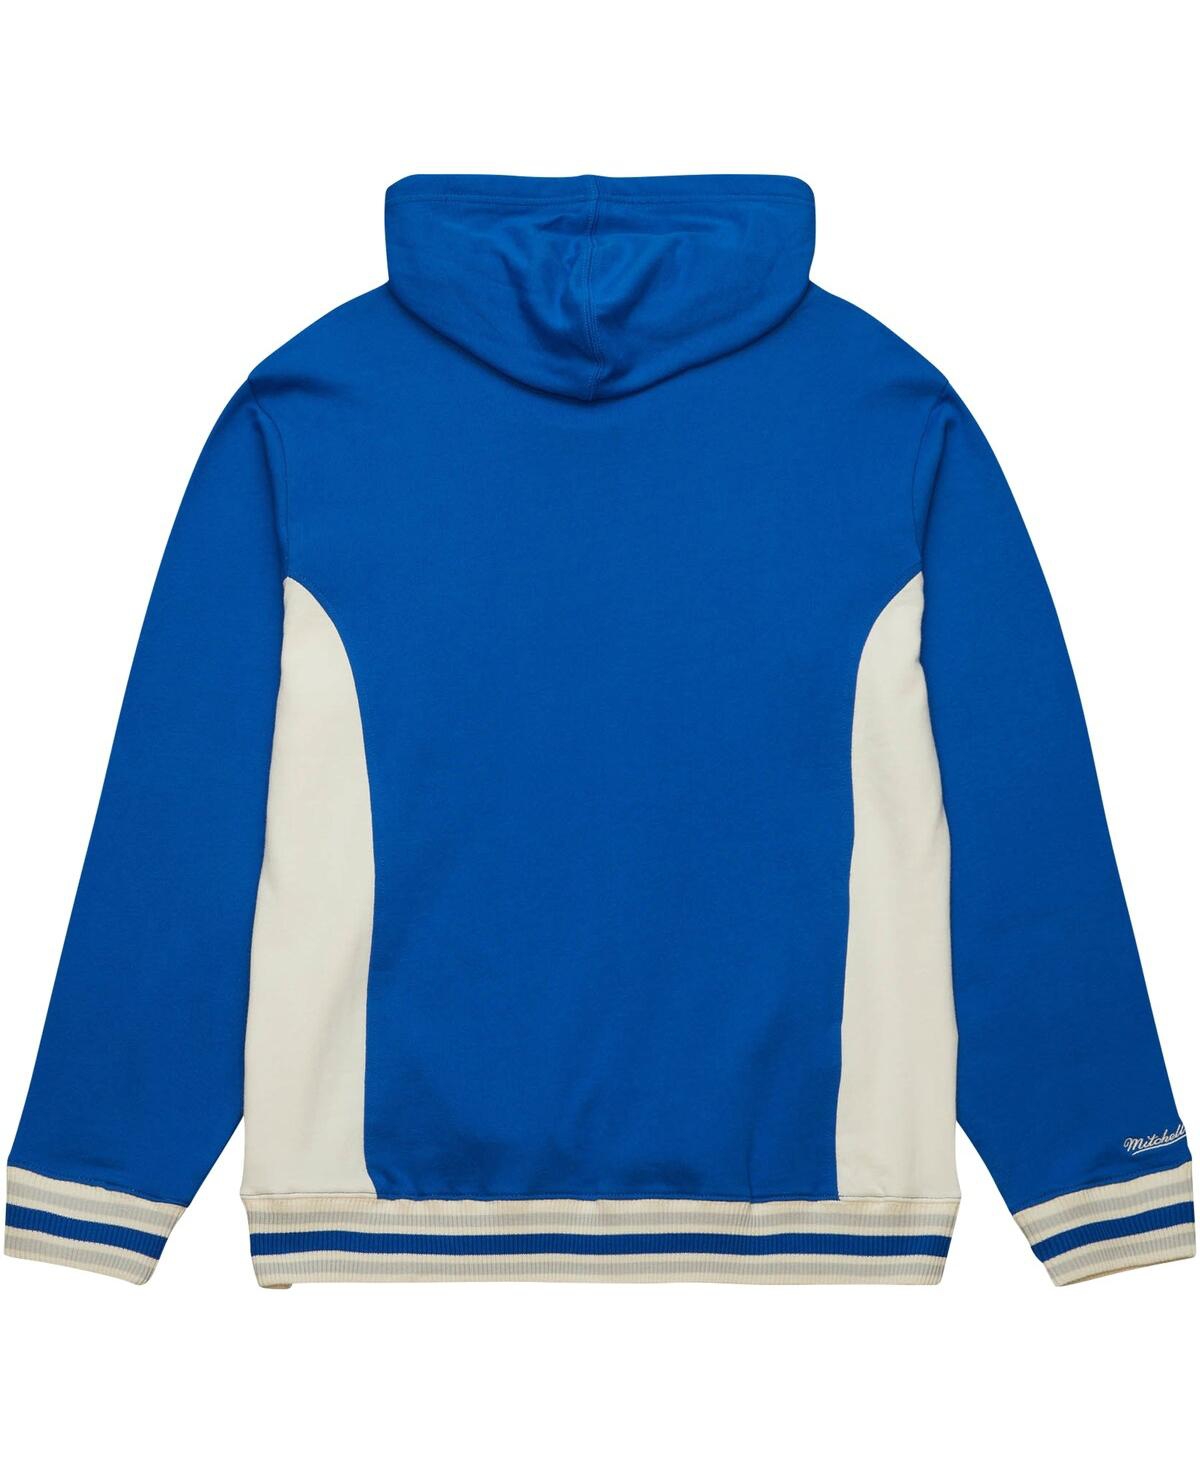 Shop Mitchell & Ness Men's  Royal Kentucky Wildcats Team Legacy French Terry Pullover Hoodie